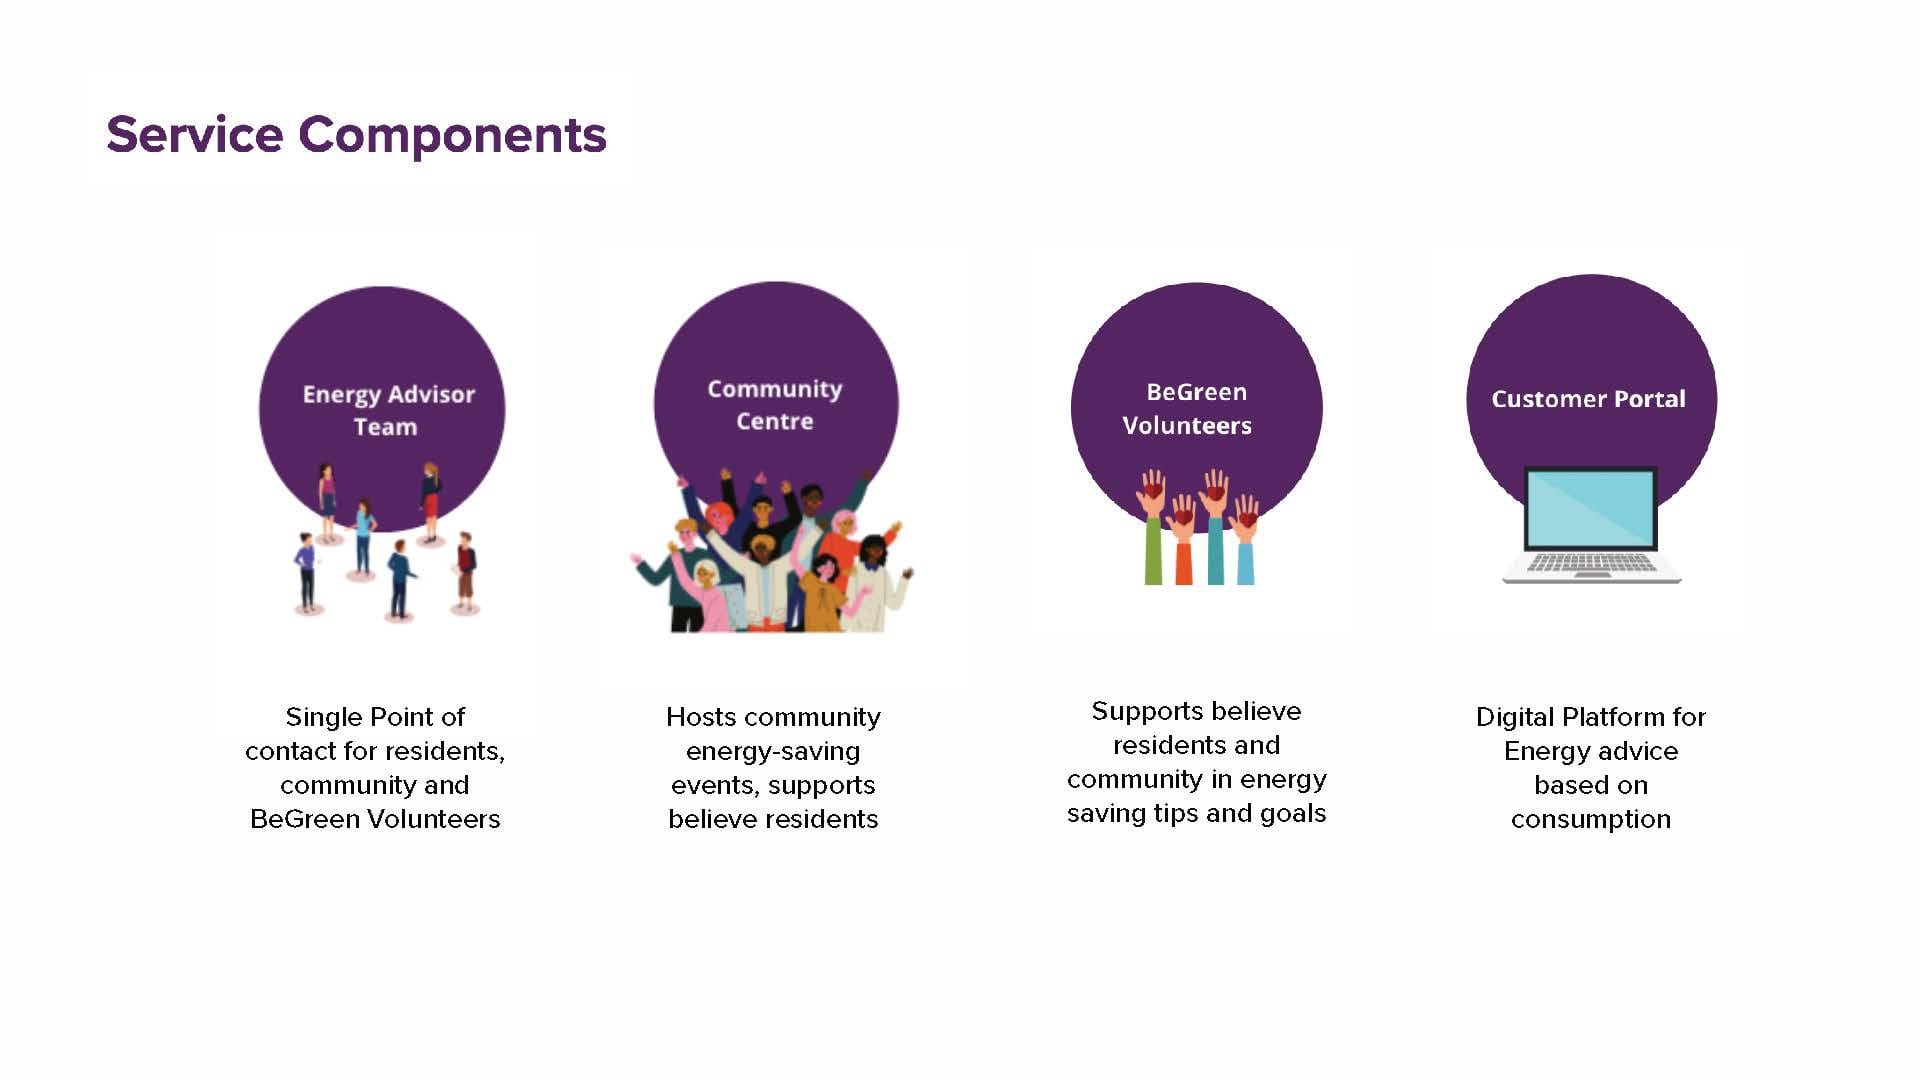 At the heart of the scheme is believe residents whose diverse needs are catered for through four key components: a digital customer portal, an energy advisor team, community centres and BeGreen Volunt